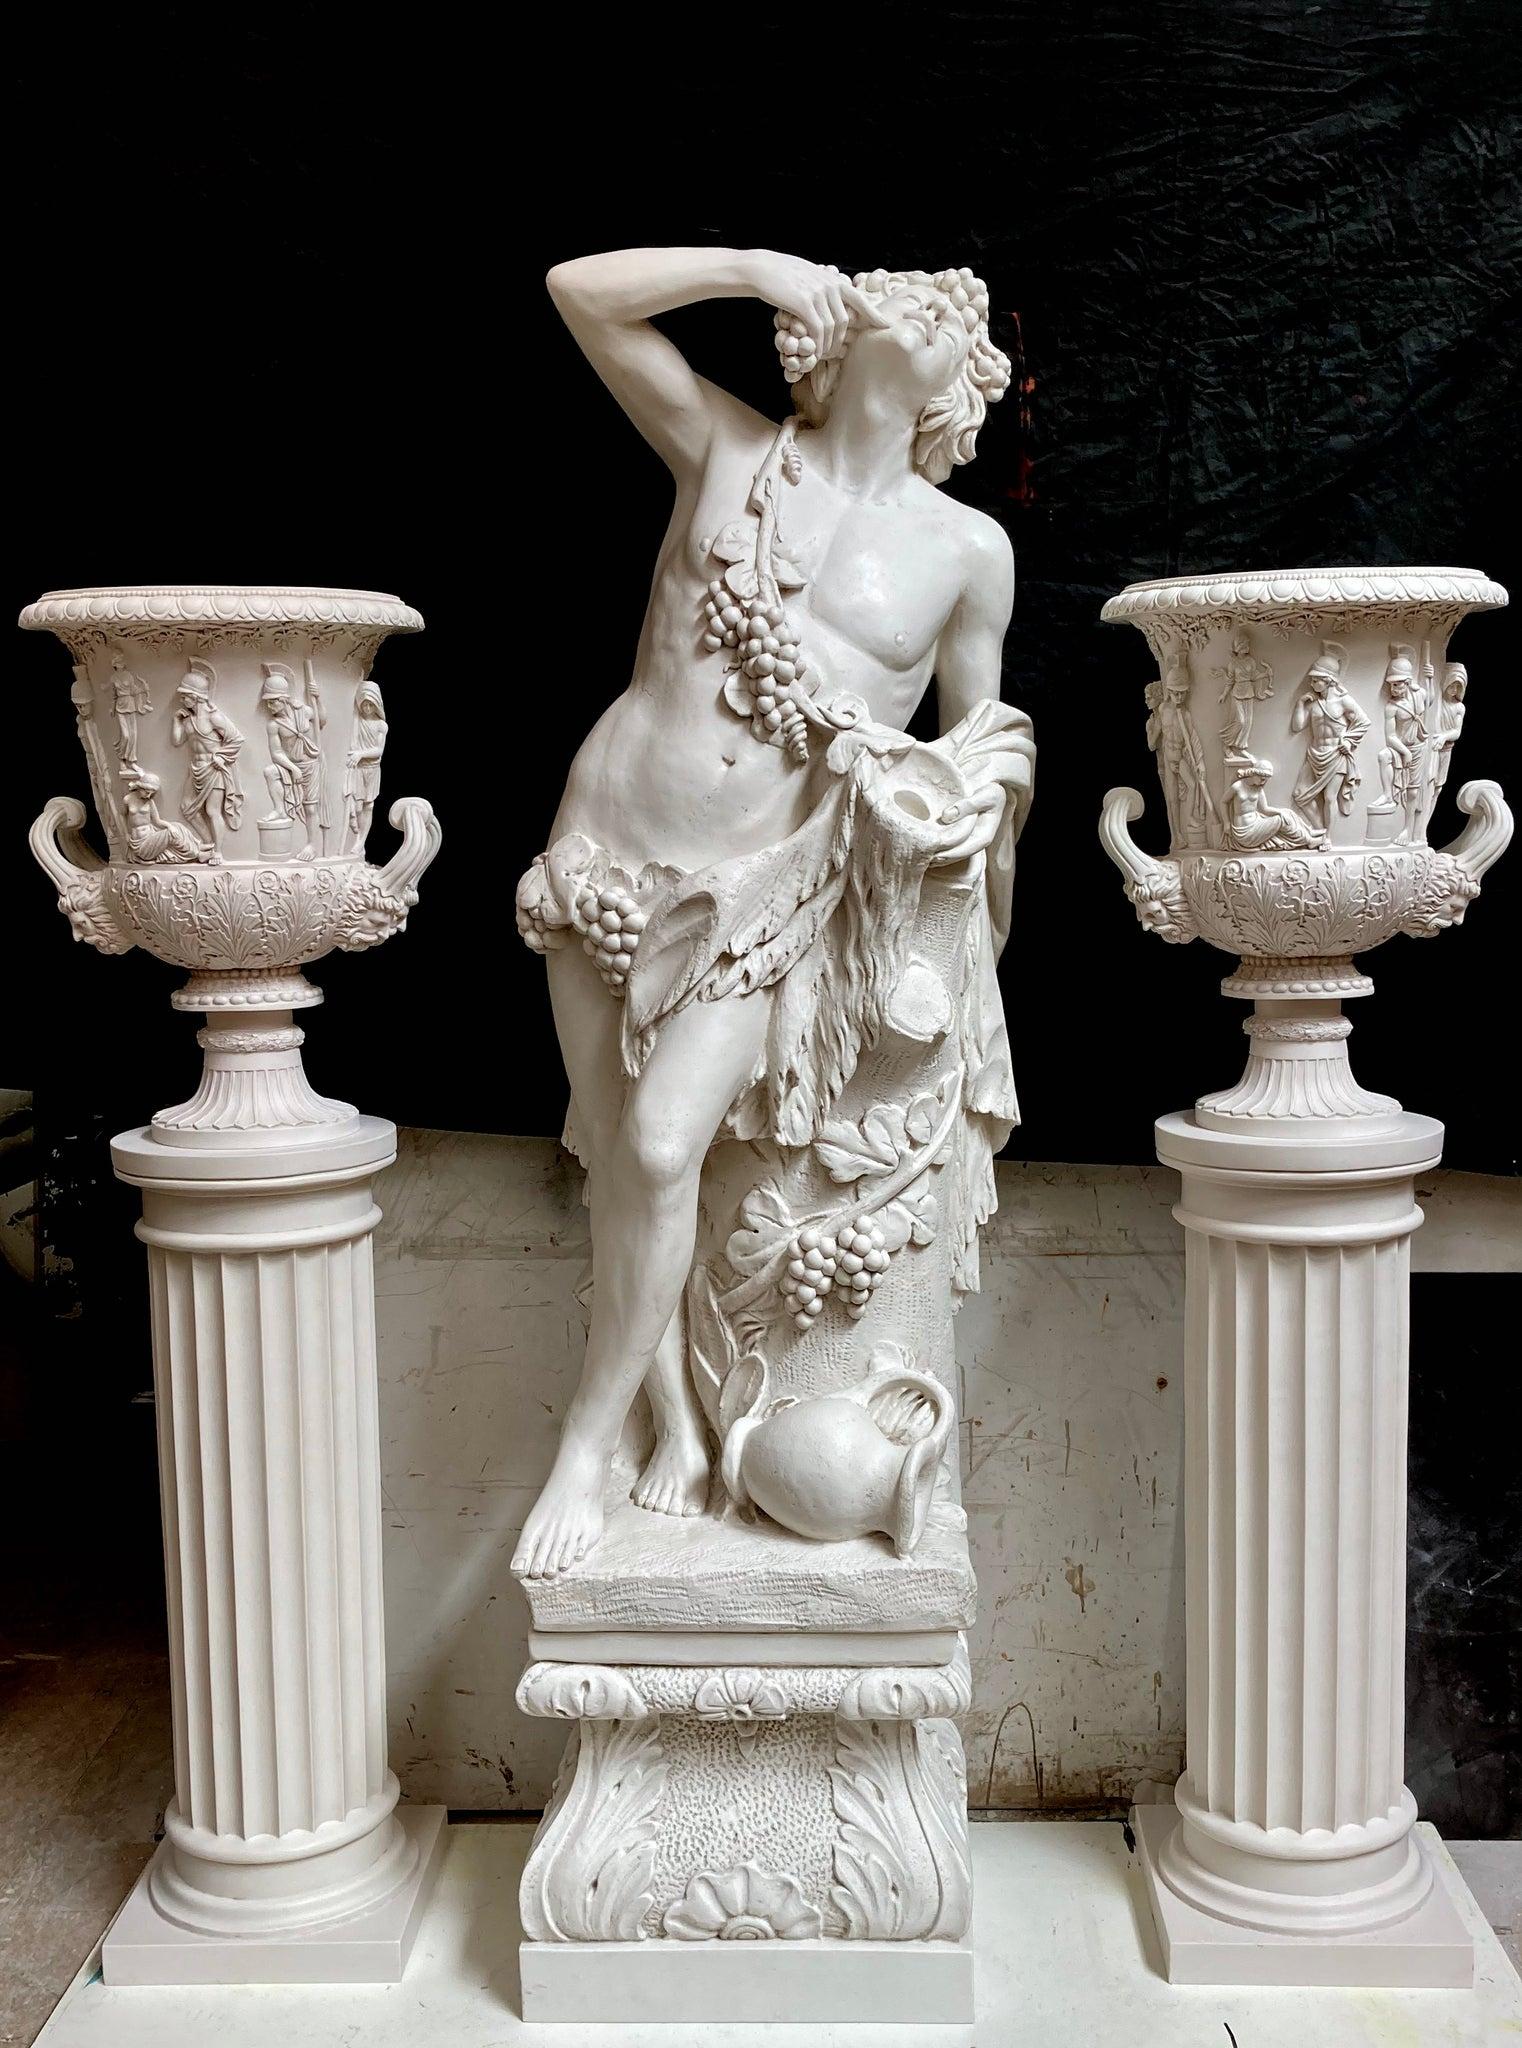 A marble Statue of Bacchus.

The Greek god Dionysus, or Bacchus, was a son of Zeus and the god of the vine. 

This Grand tour statue is depicting him, spilling his Goblet of wine, and looking like he may have had enough, with his empty wine ewer